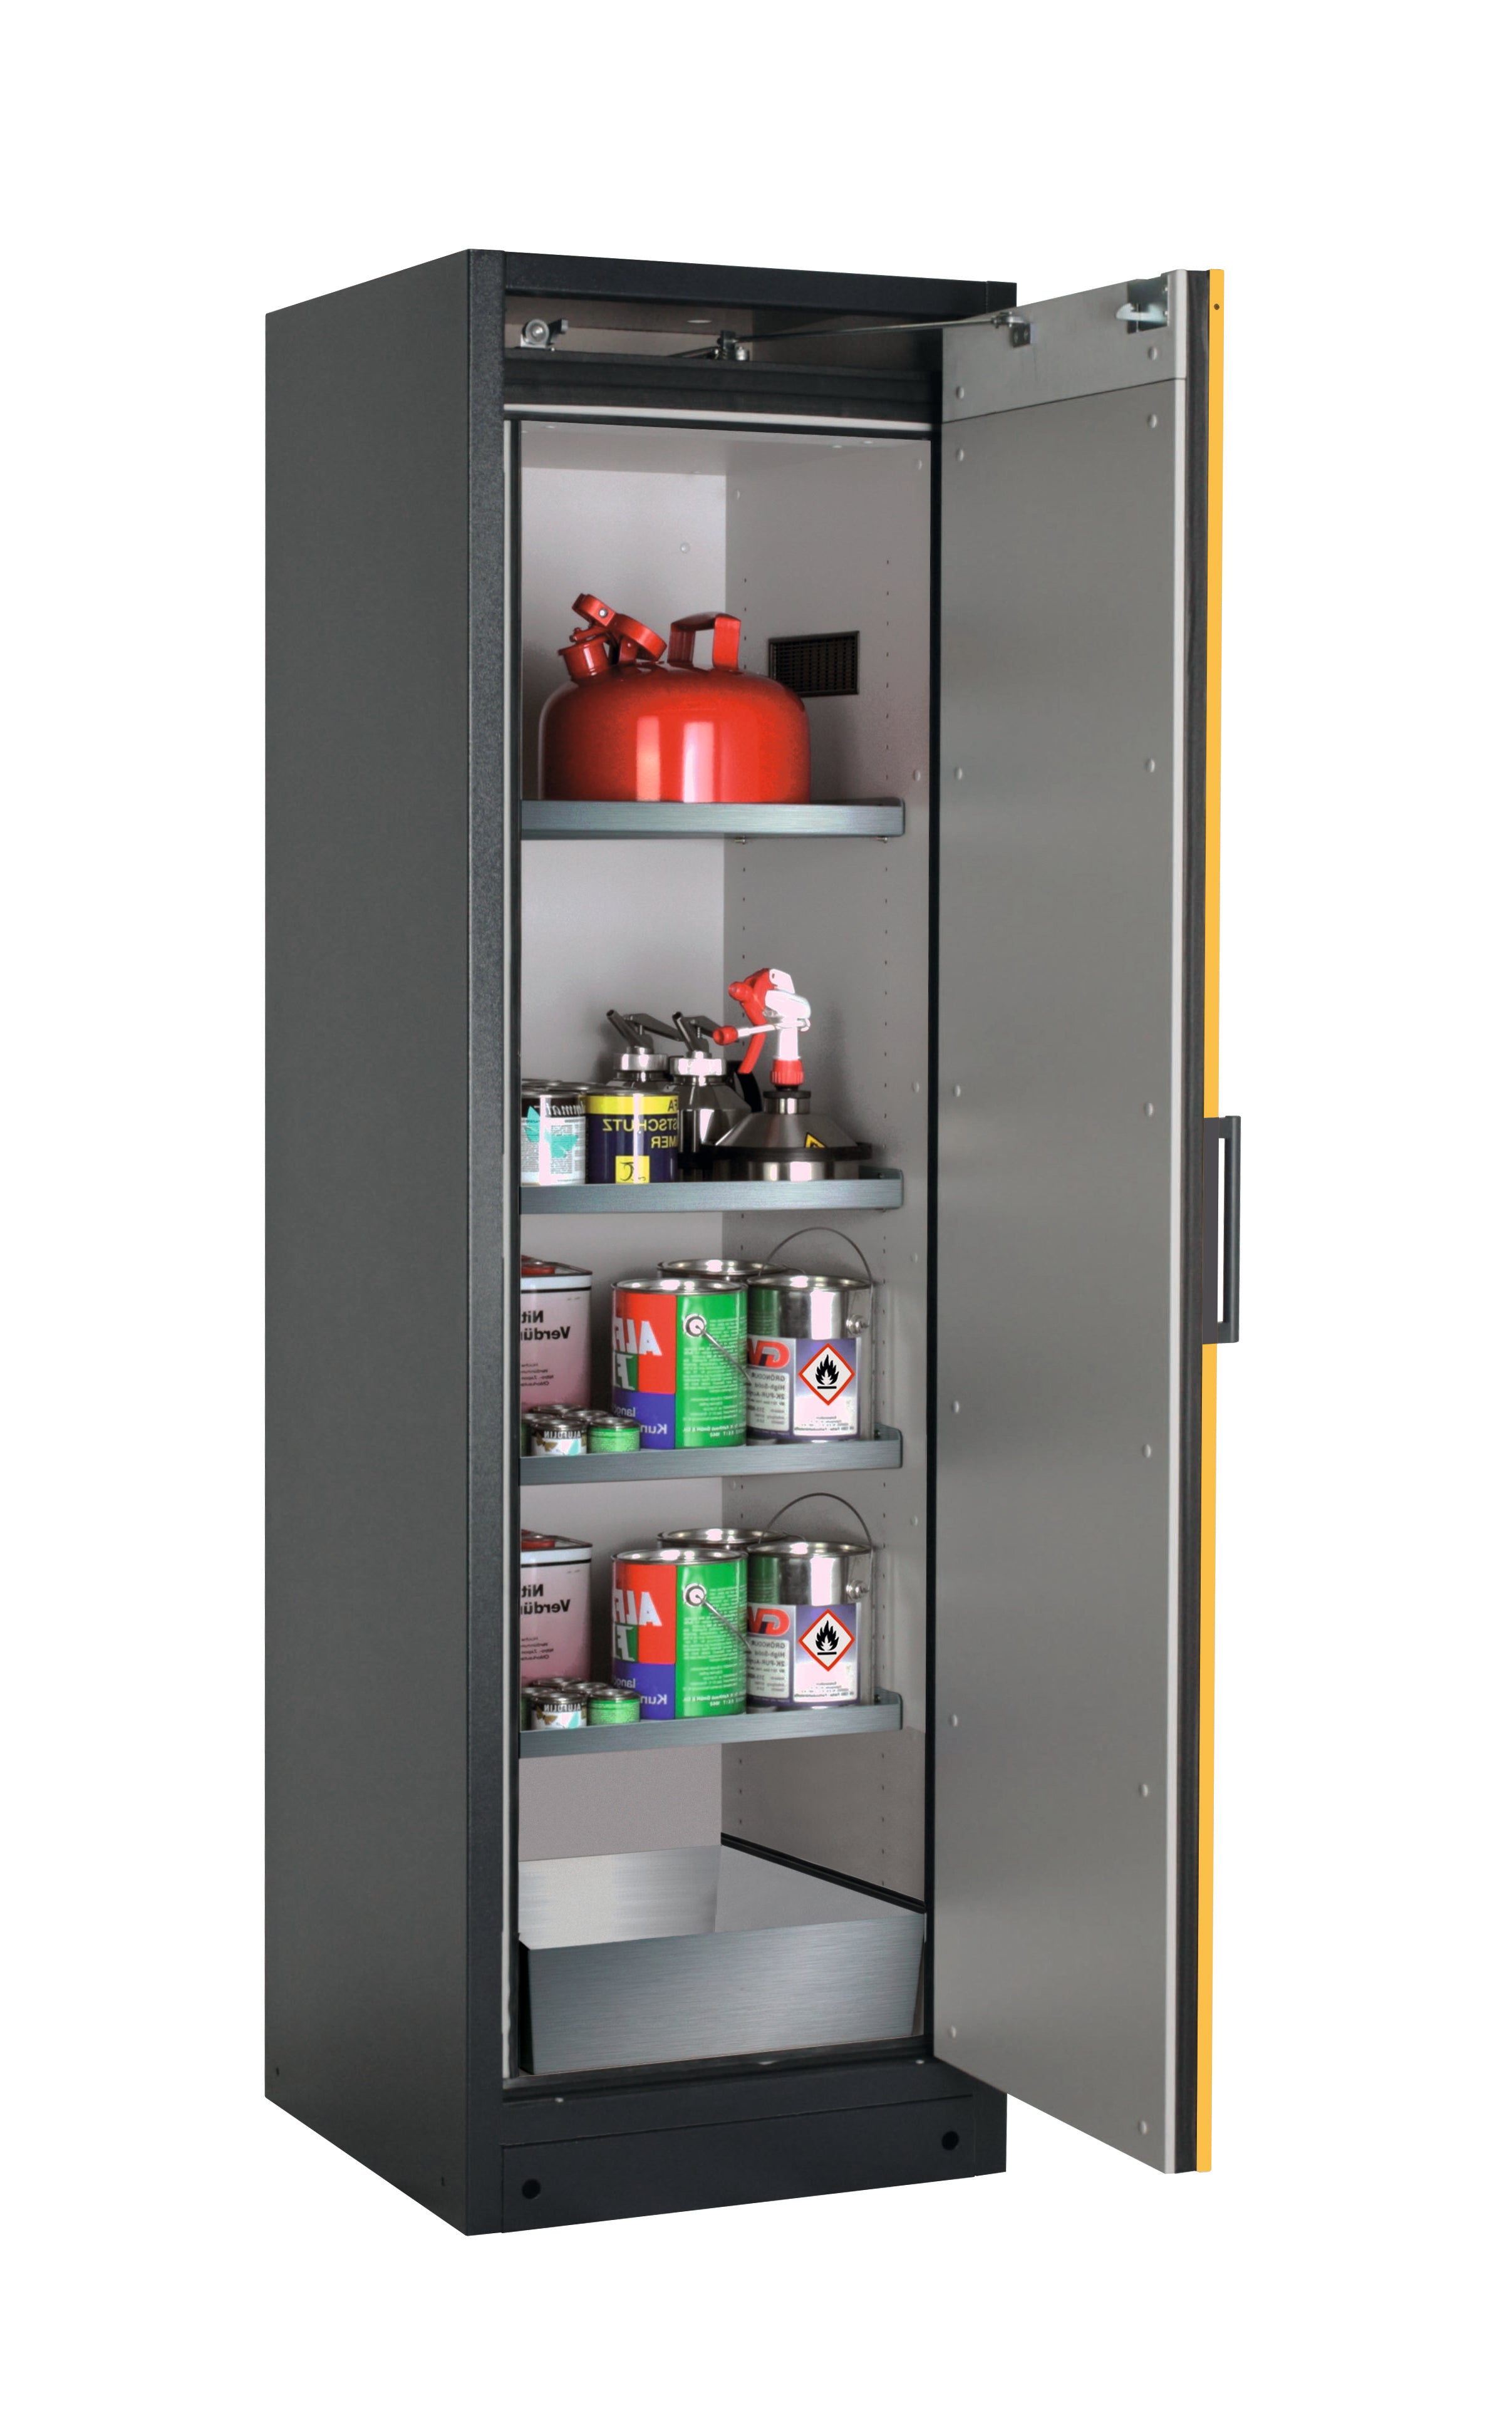 Type 90 safety storage cabinet Q-PEGASUS-90 model Q90.195.060.WDACR in warning yellow RAL 1004 with 4x shelf standard (stainless steel 1.4301),